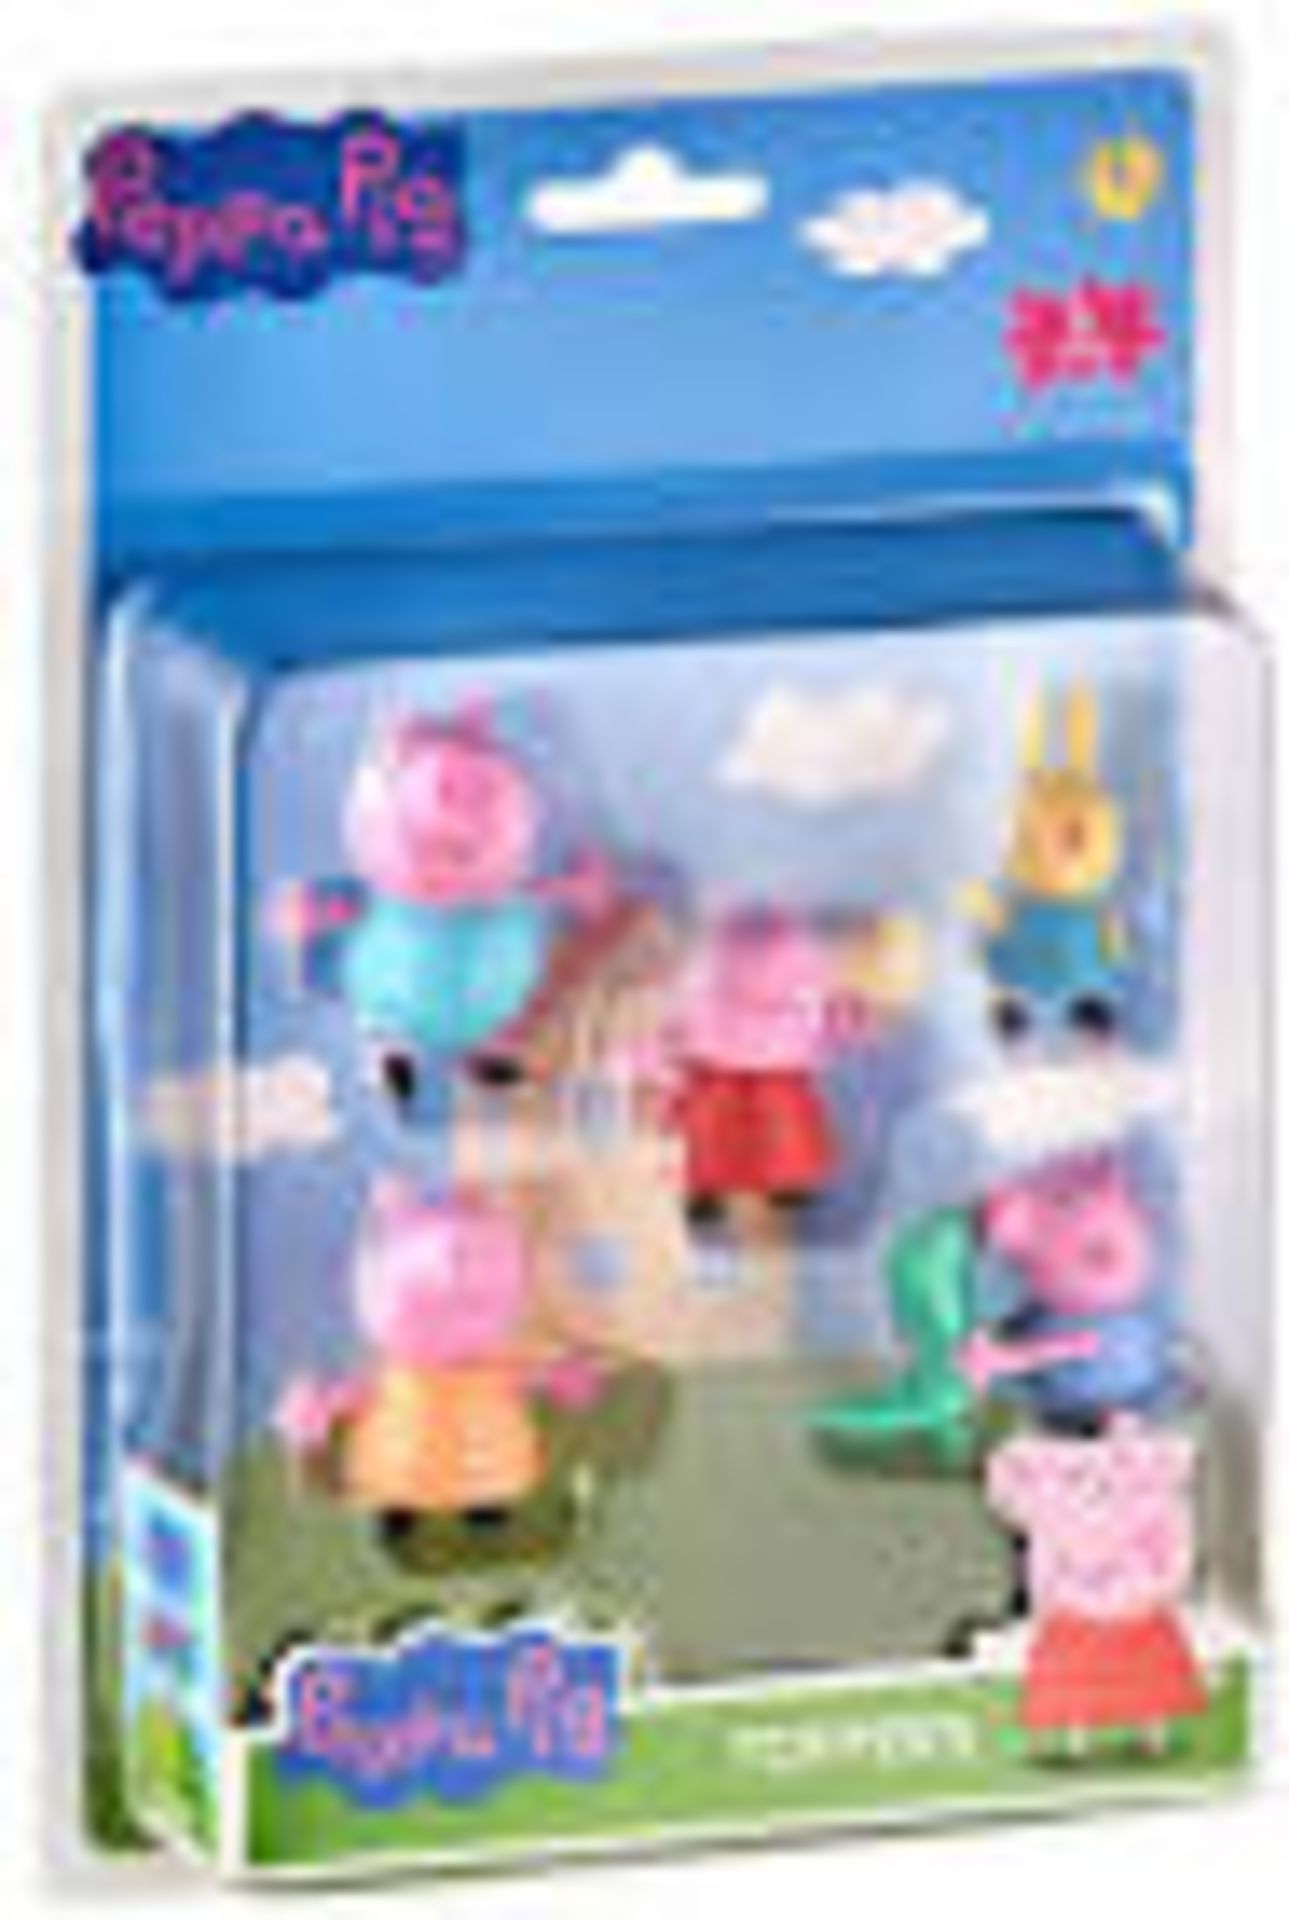 100 x Peppa Pig Toppers/Stamper Sets - Image 4 of 4